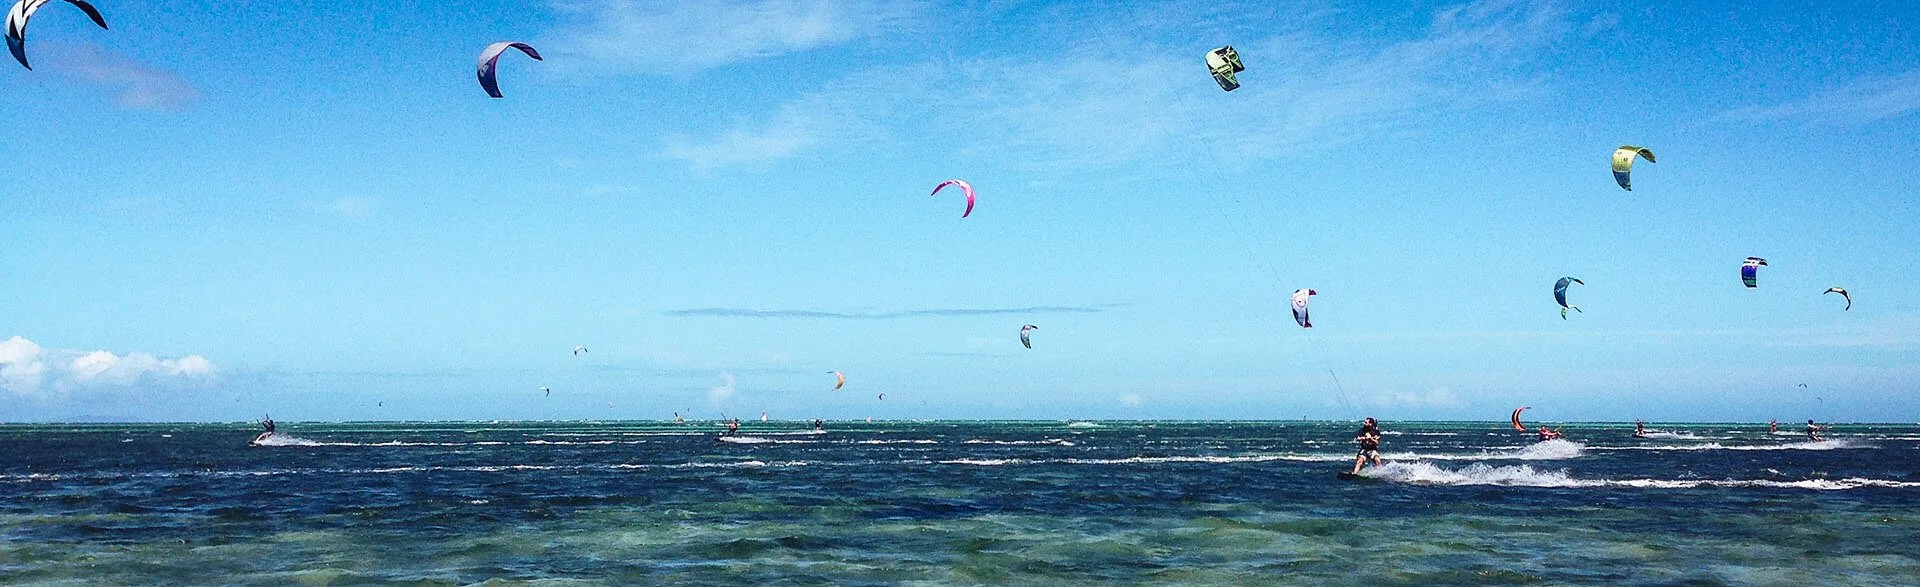 Kite surfers at Ilot Maitre, one of the best beaches in New Caledonia.